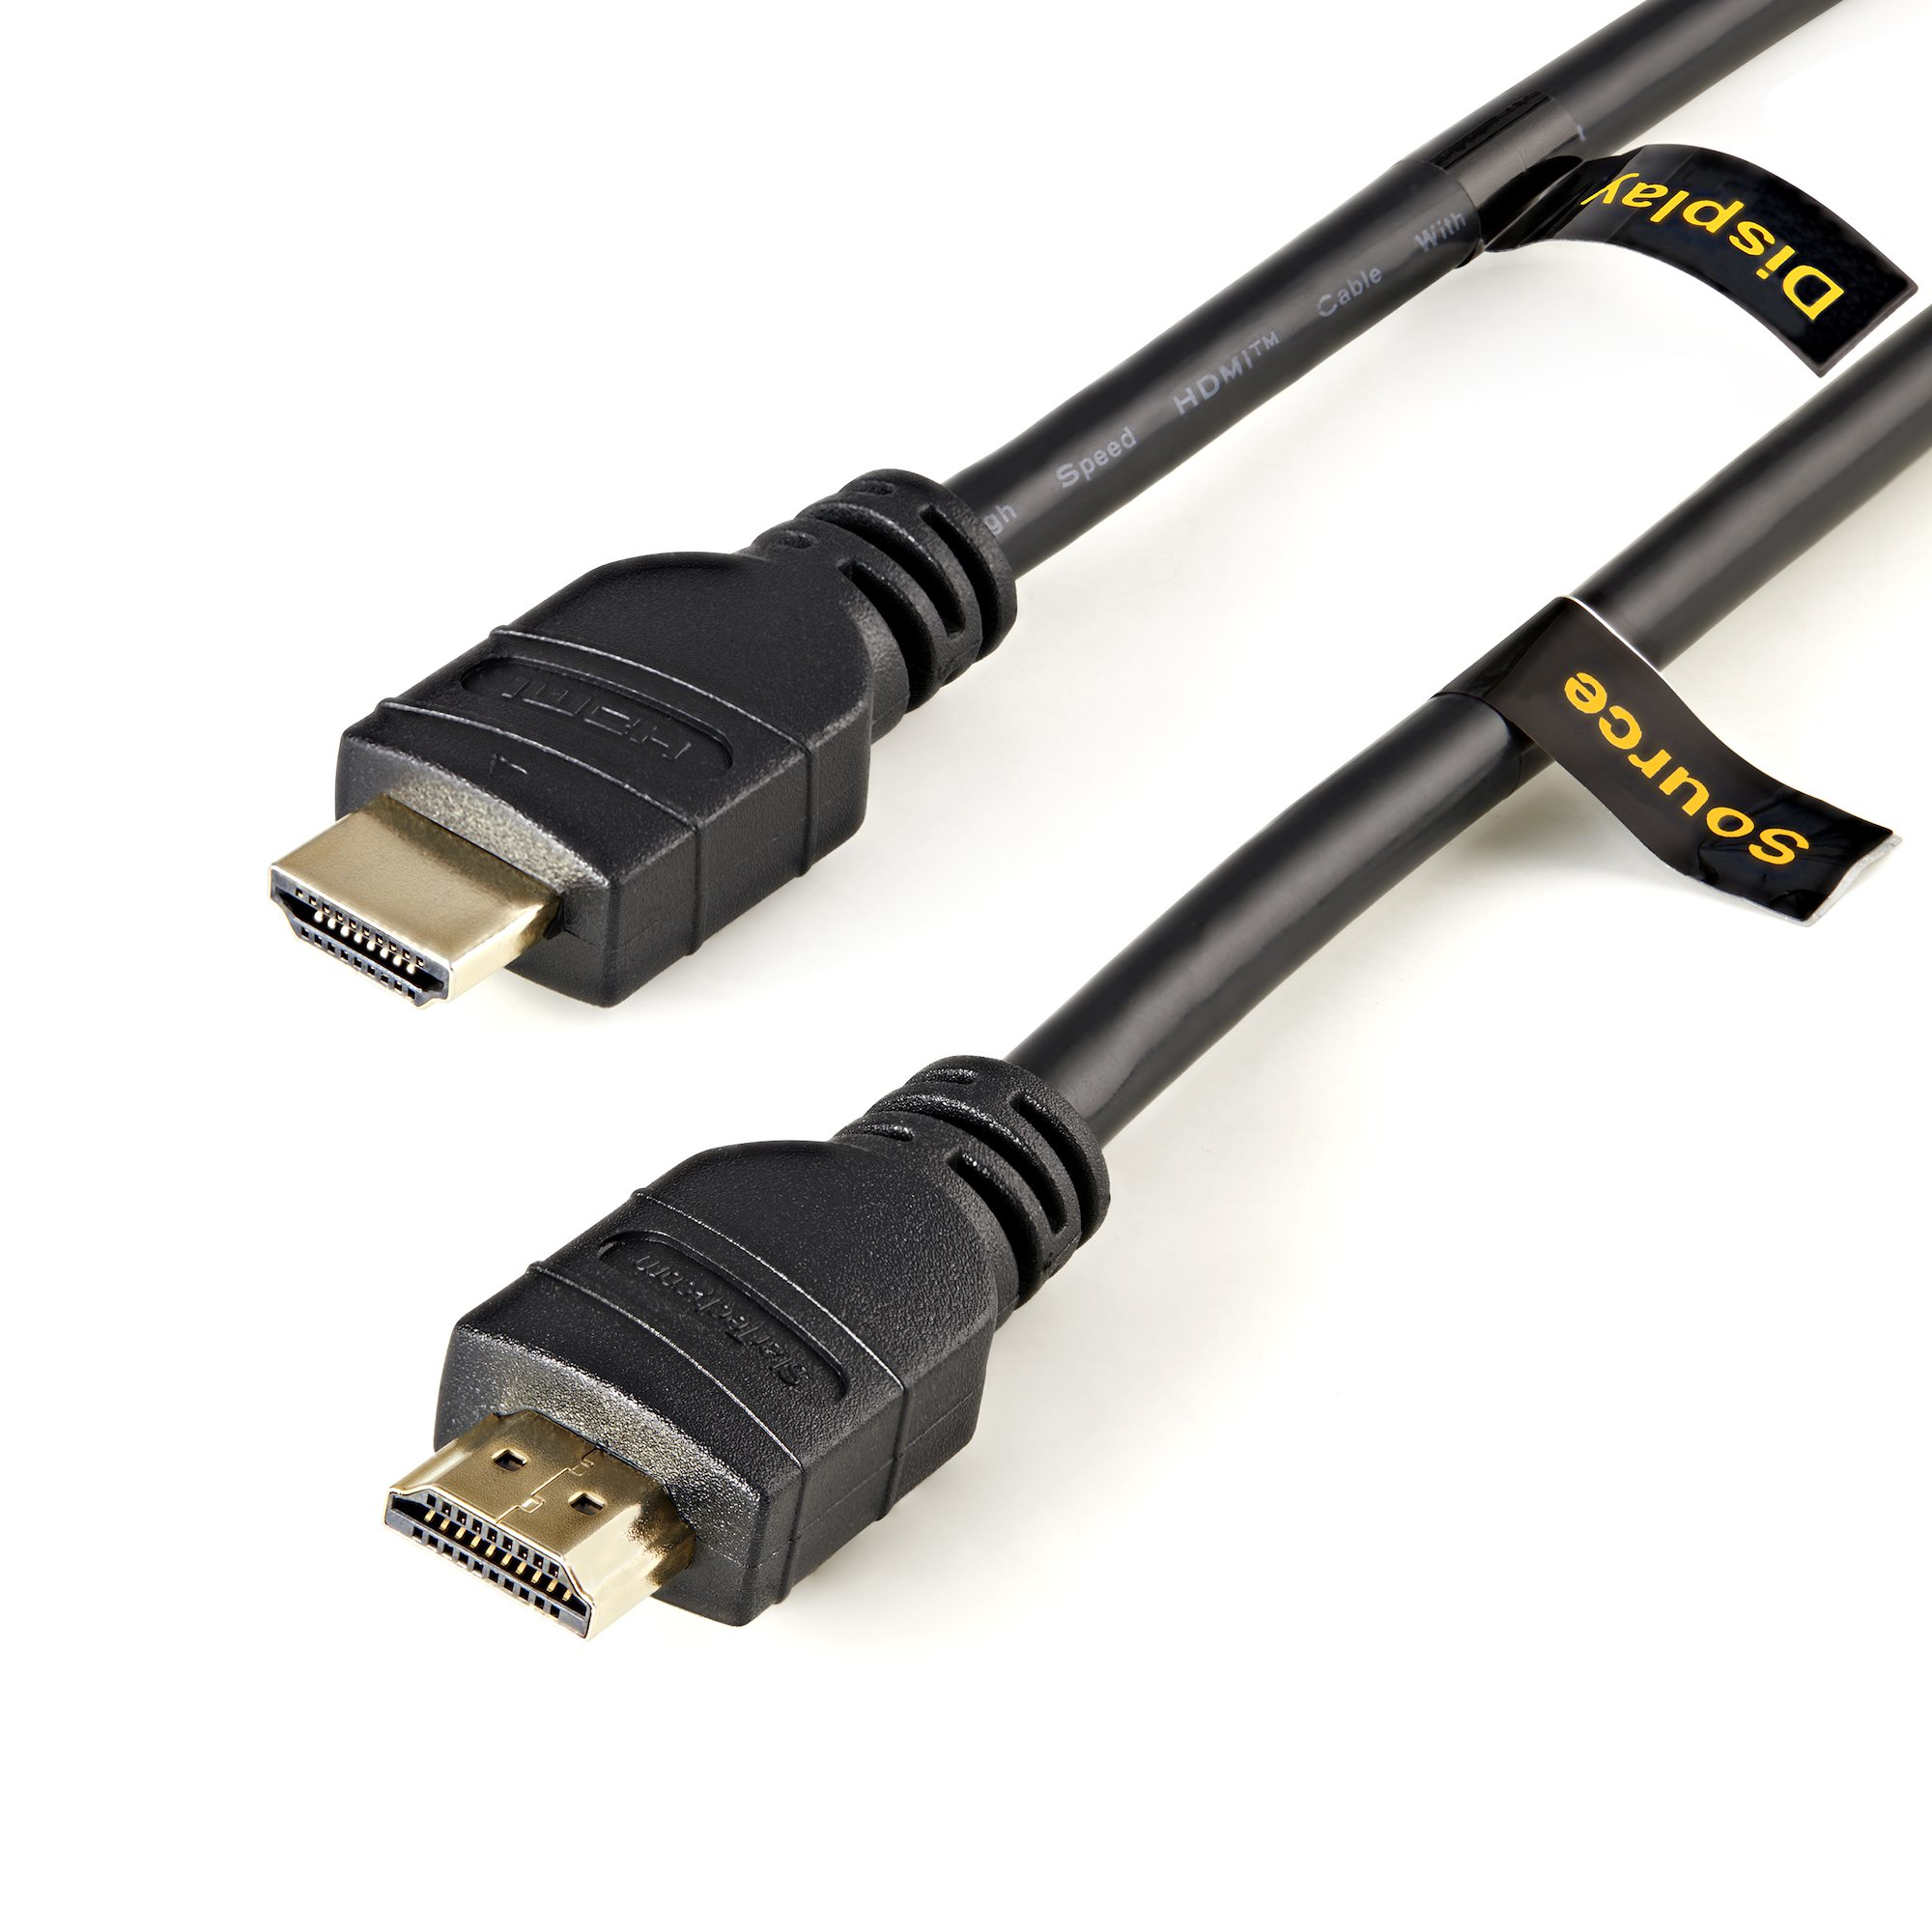 StarTech.com 50ft (15m) Active HDMI Cable - 4K High Speed HDMI Cable with Ethernet - CL2 Rated for In-Wall Install - 4K 30Hz Video - HDMI 1.4 Cord - For HDMI Monitor, Projector, TV, Display